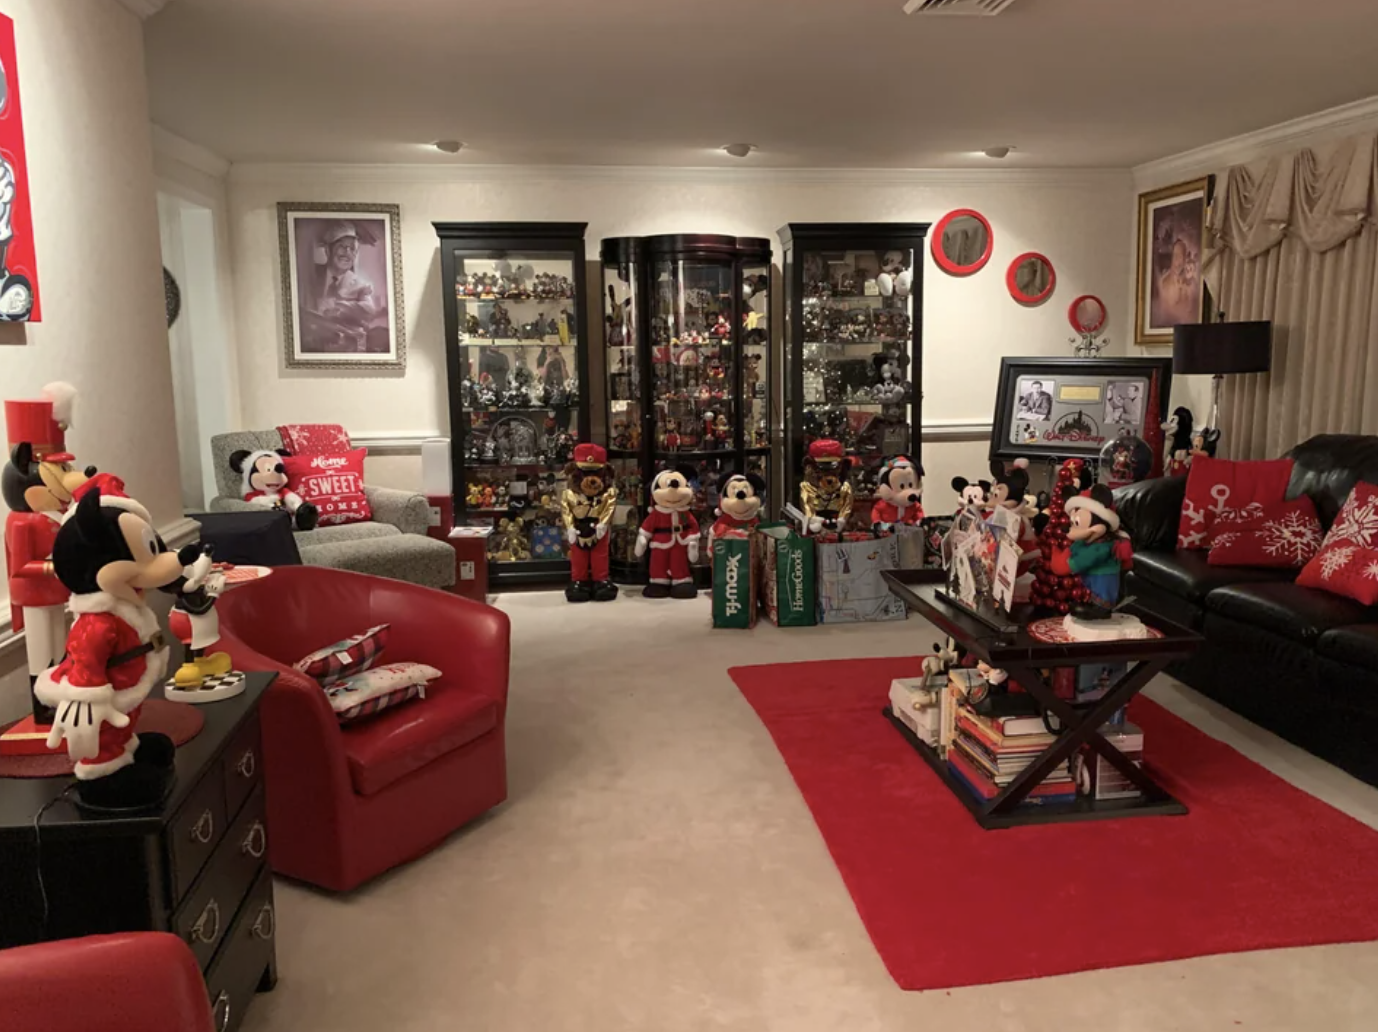 This living room features many Mickey and Minnie figures in Christmas garb